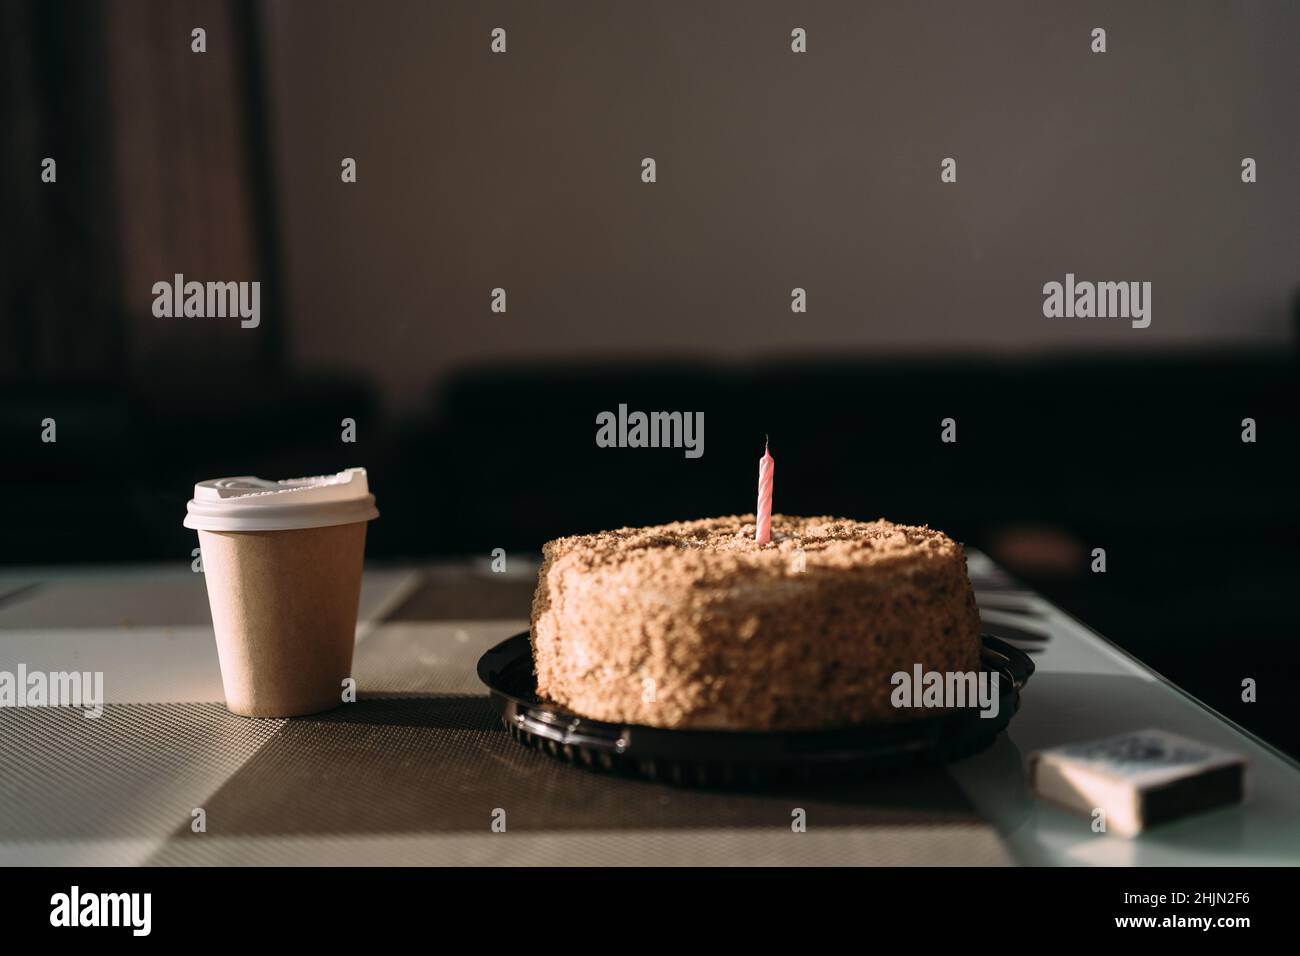 cake with one candle and a paper cup with coffee in a cafe. Breakfast Americano in a glass and a festive dessert. Birthday cake napoleon. Cafe menu Stock Photo